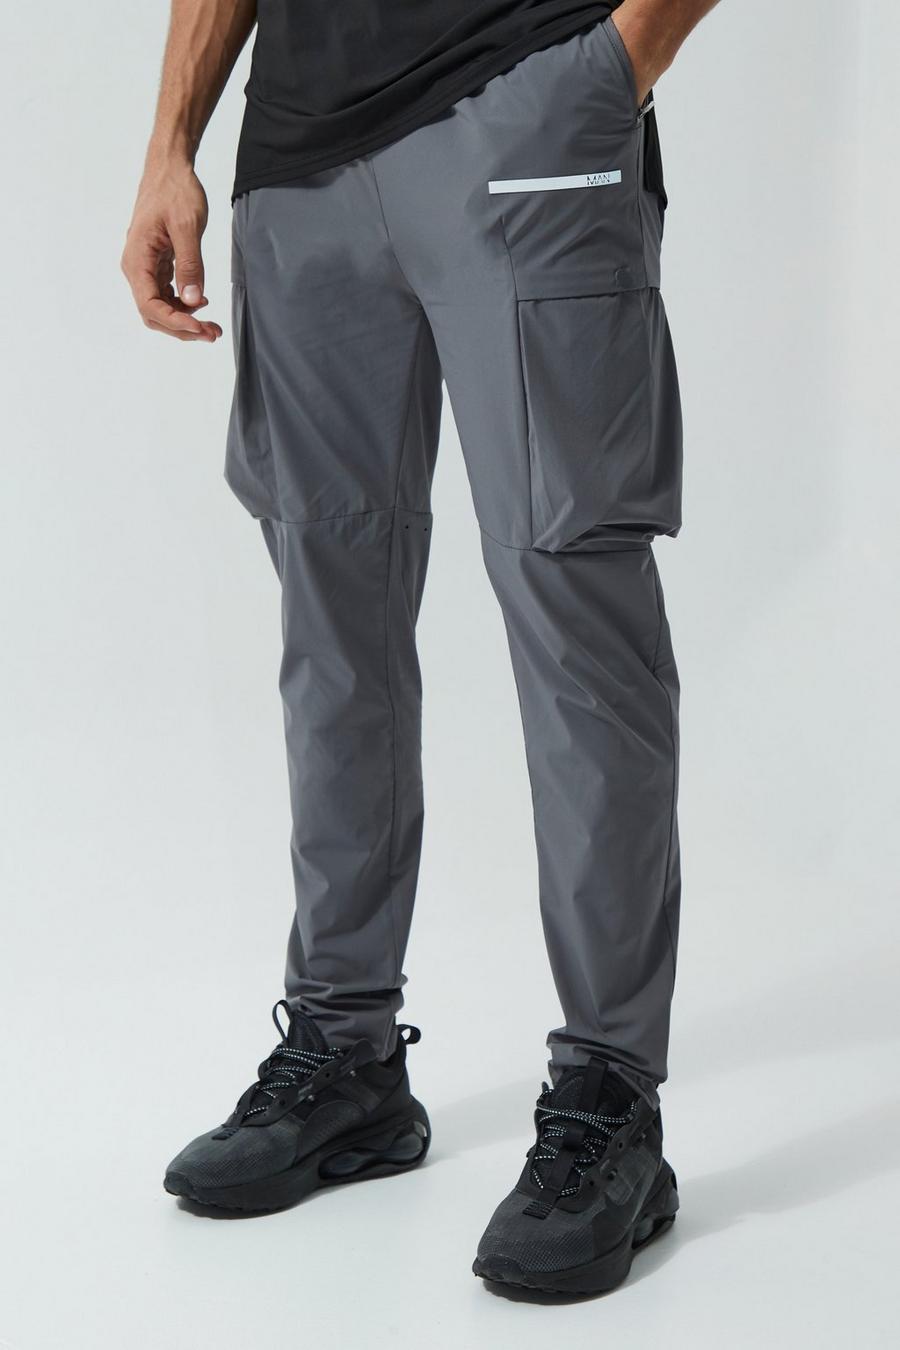 Charcoal gris Tall Man Active Perforated Cargo Pants